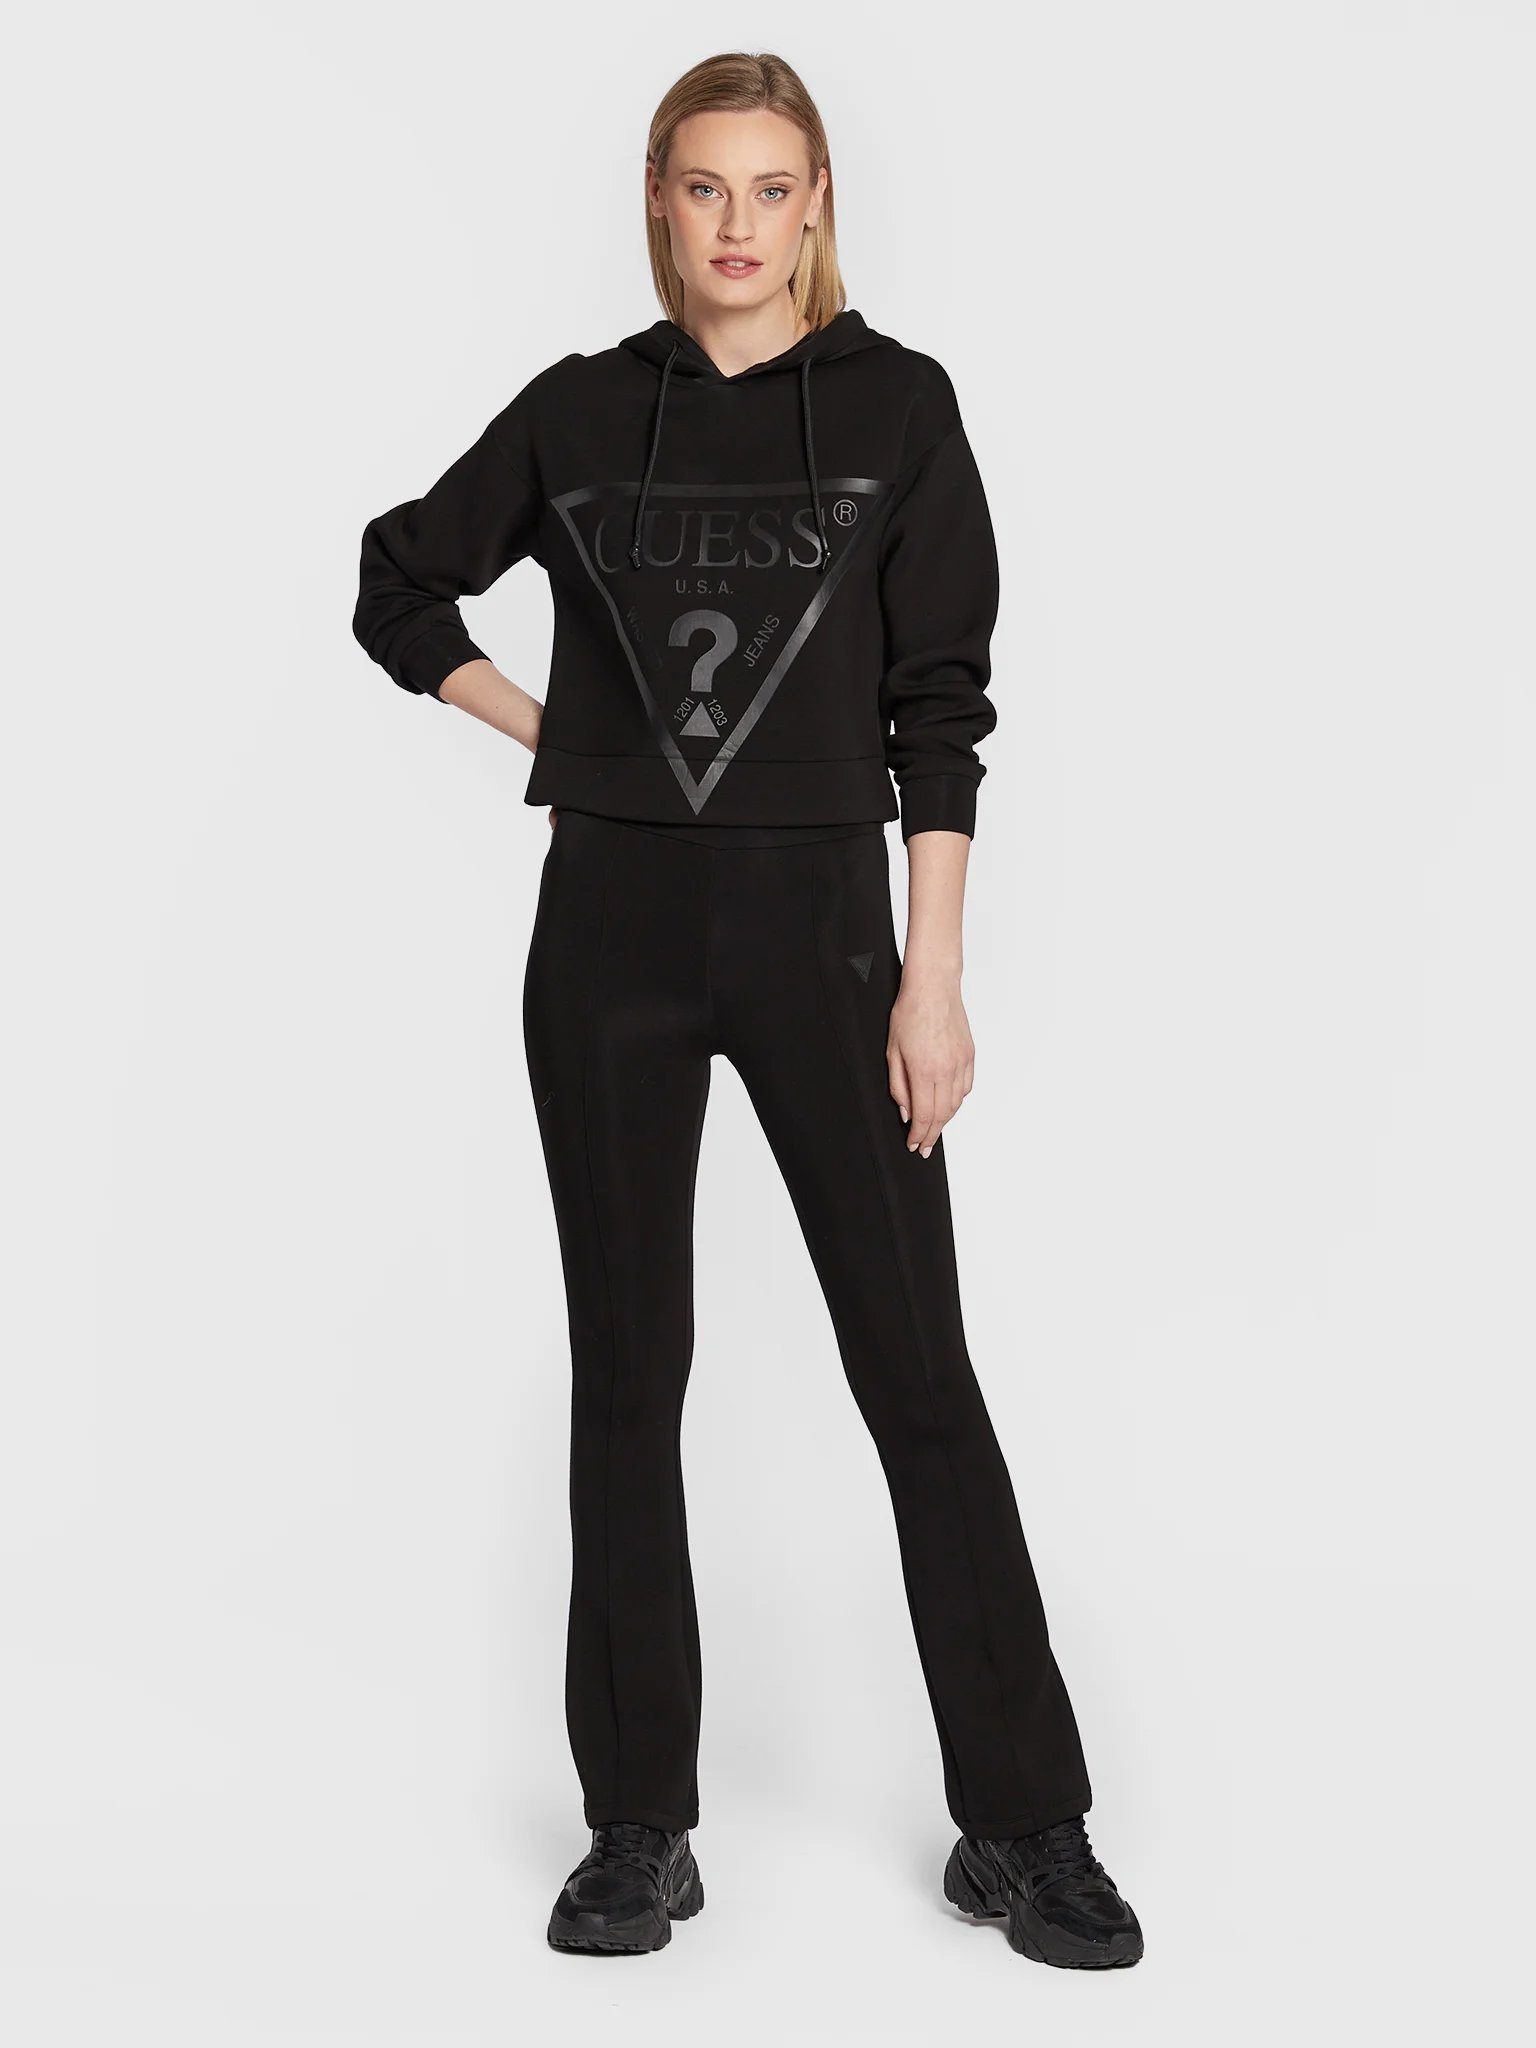 Collection Jet A996 Sweatshirt Guess Black